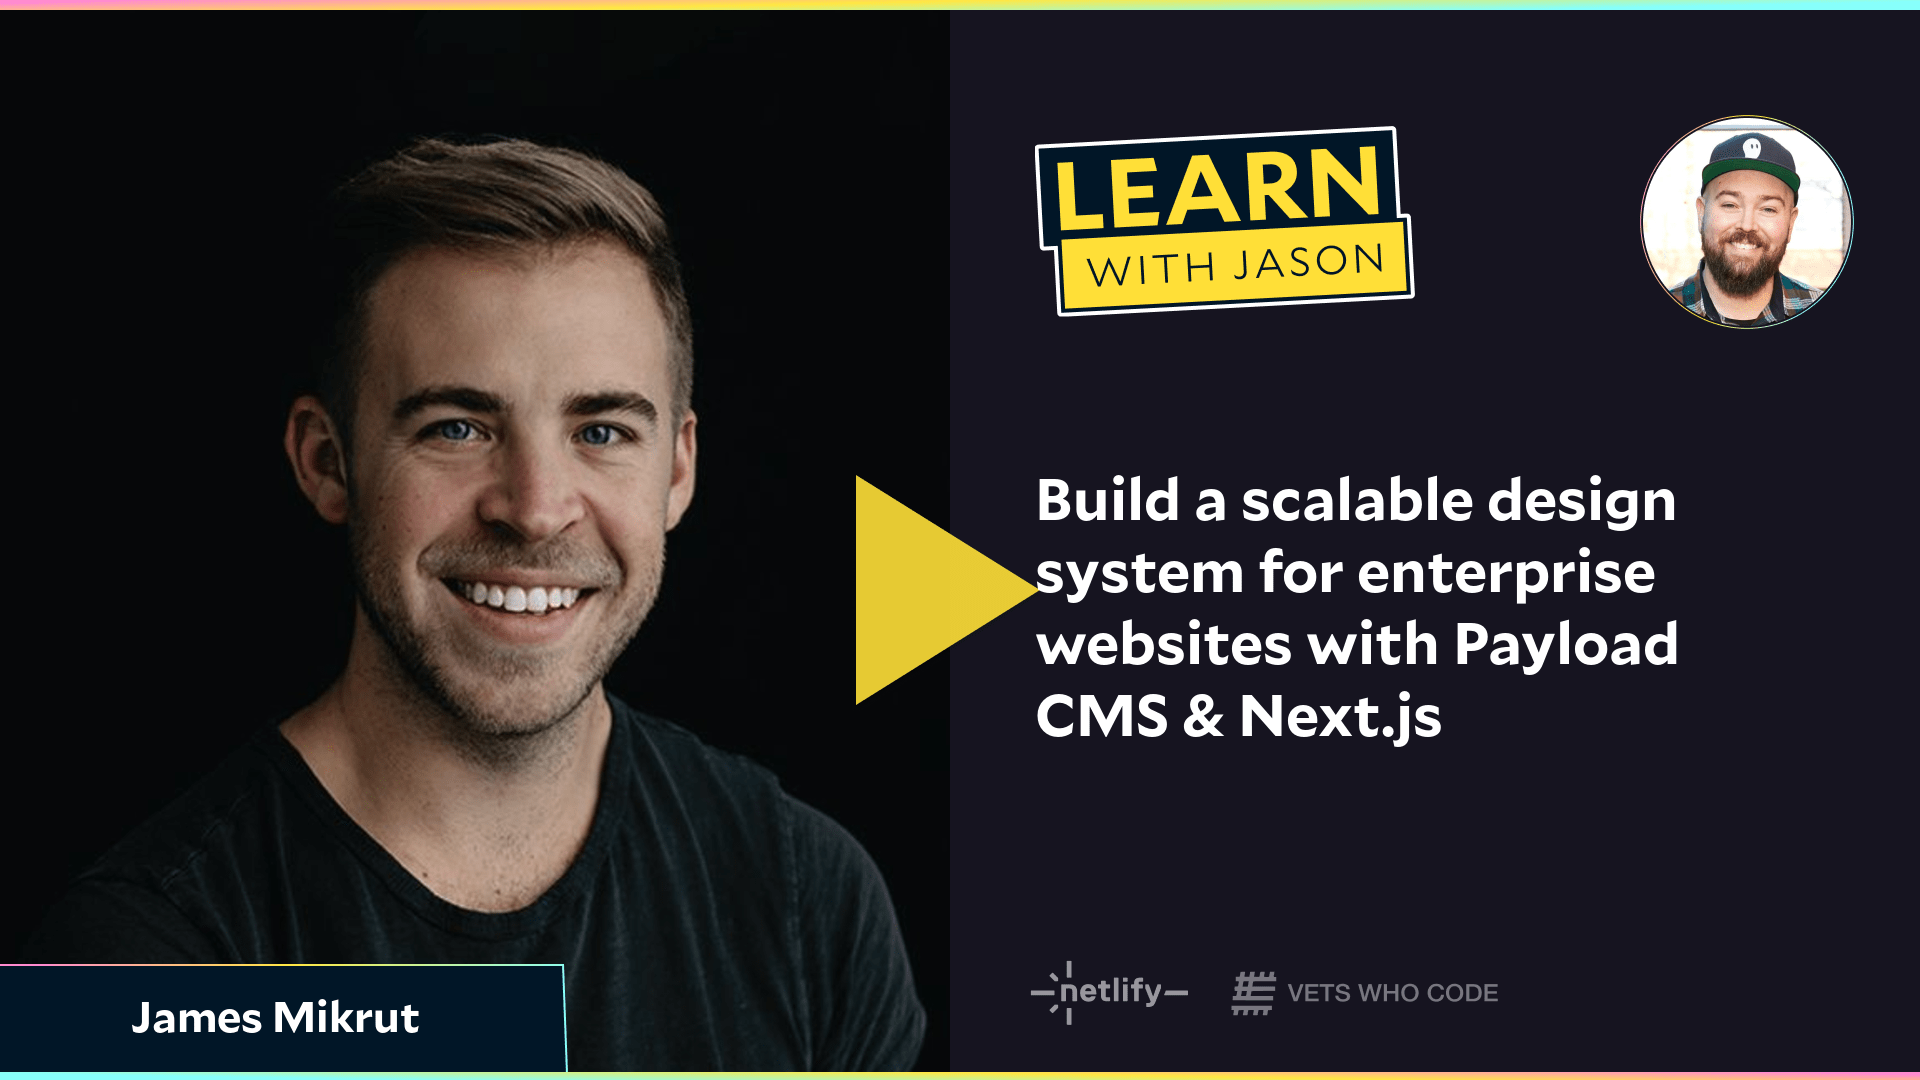 Build a scalable design system for enterprise websites with Payload CMS & Next.js (with James Mikrut)